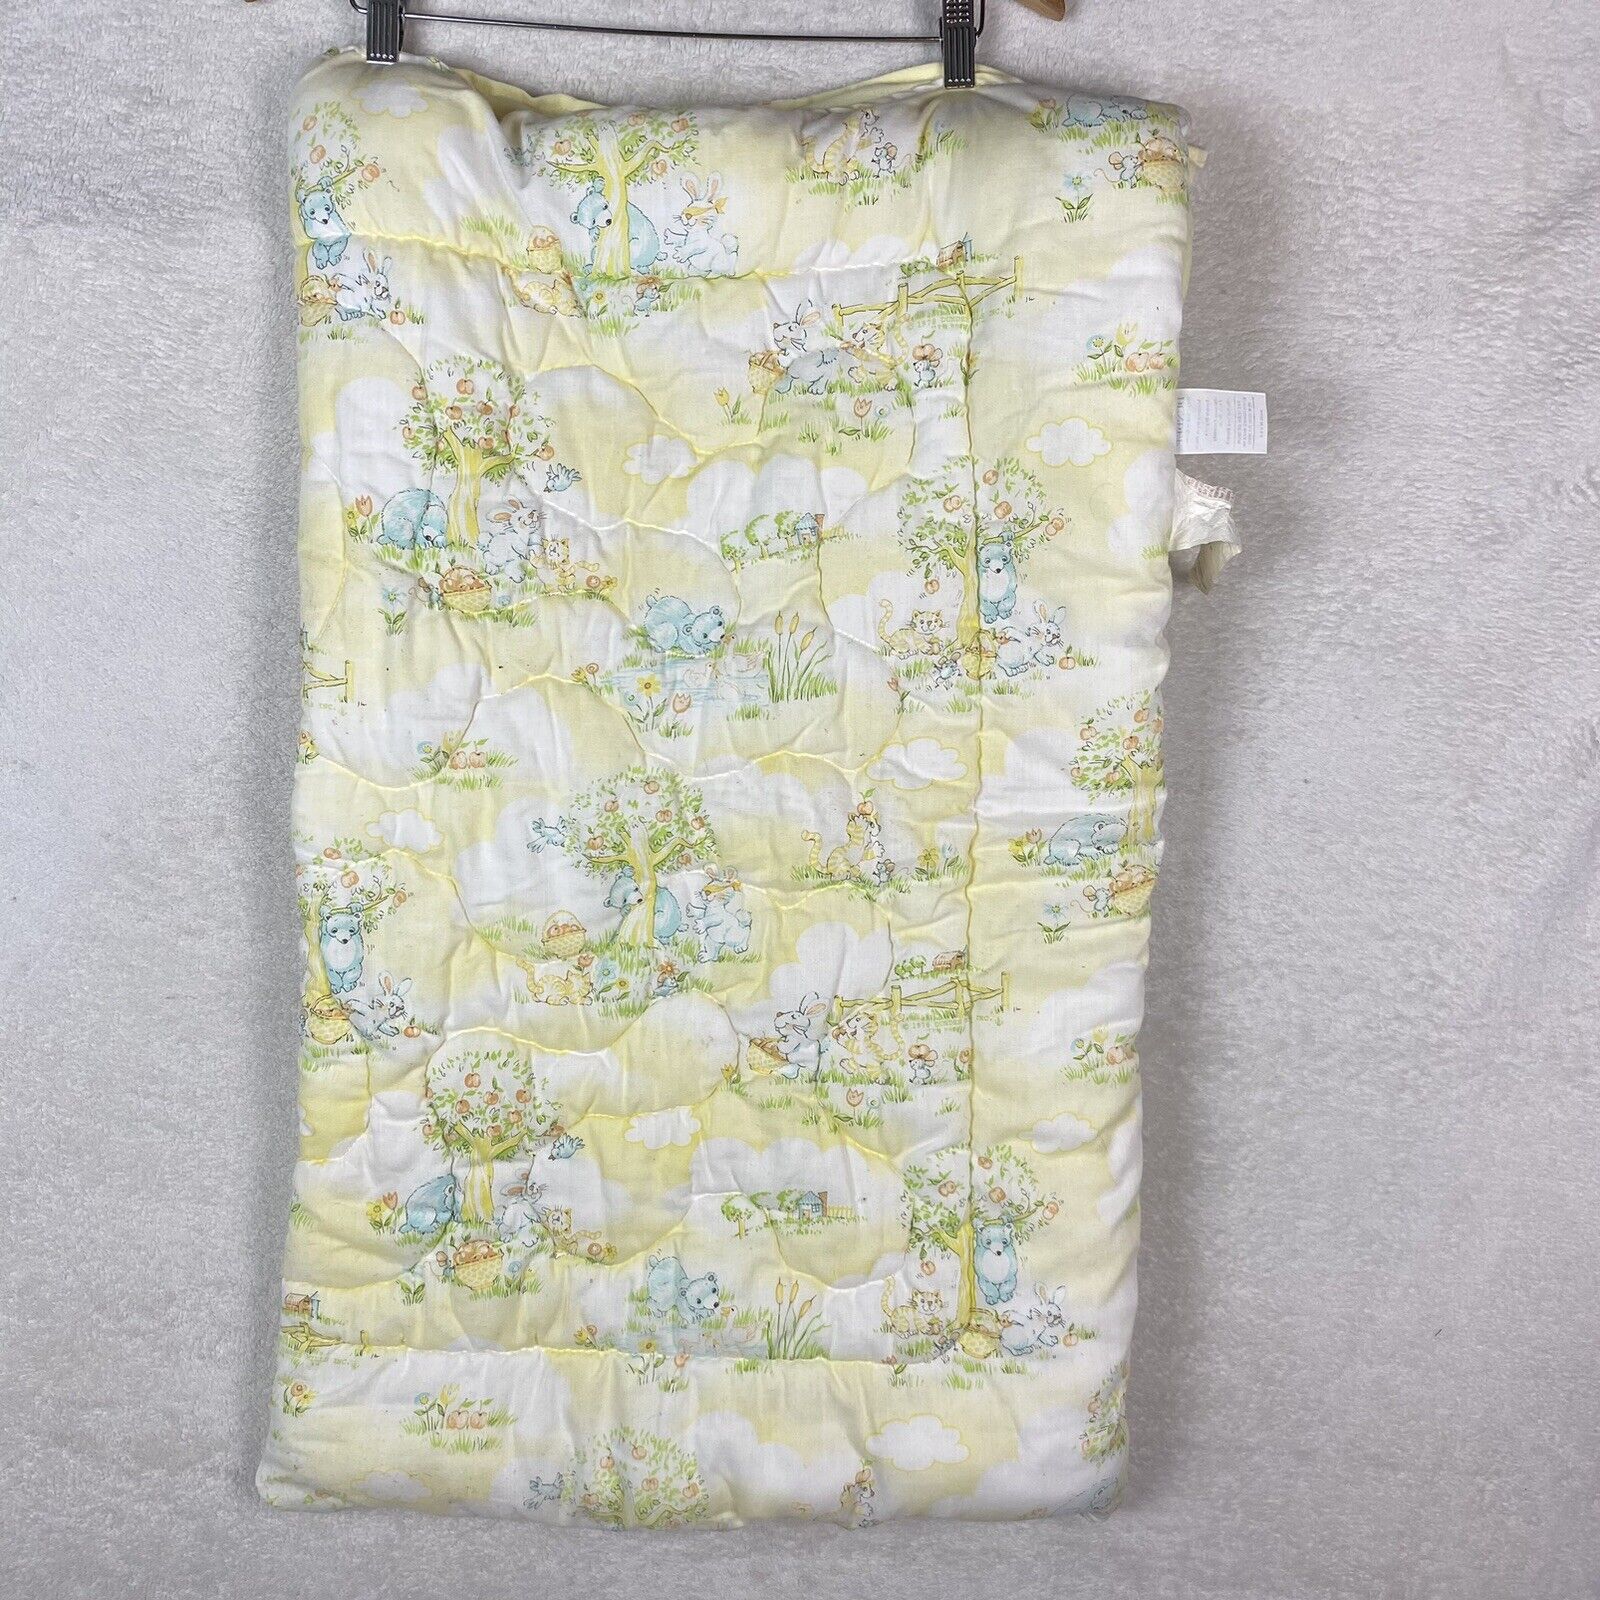 Vintage 1970s Toddler/Baby Sleeping Bag Quilted Zip-Up Playing Animals Print